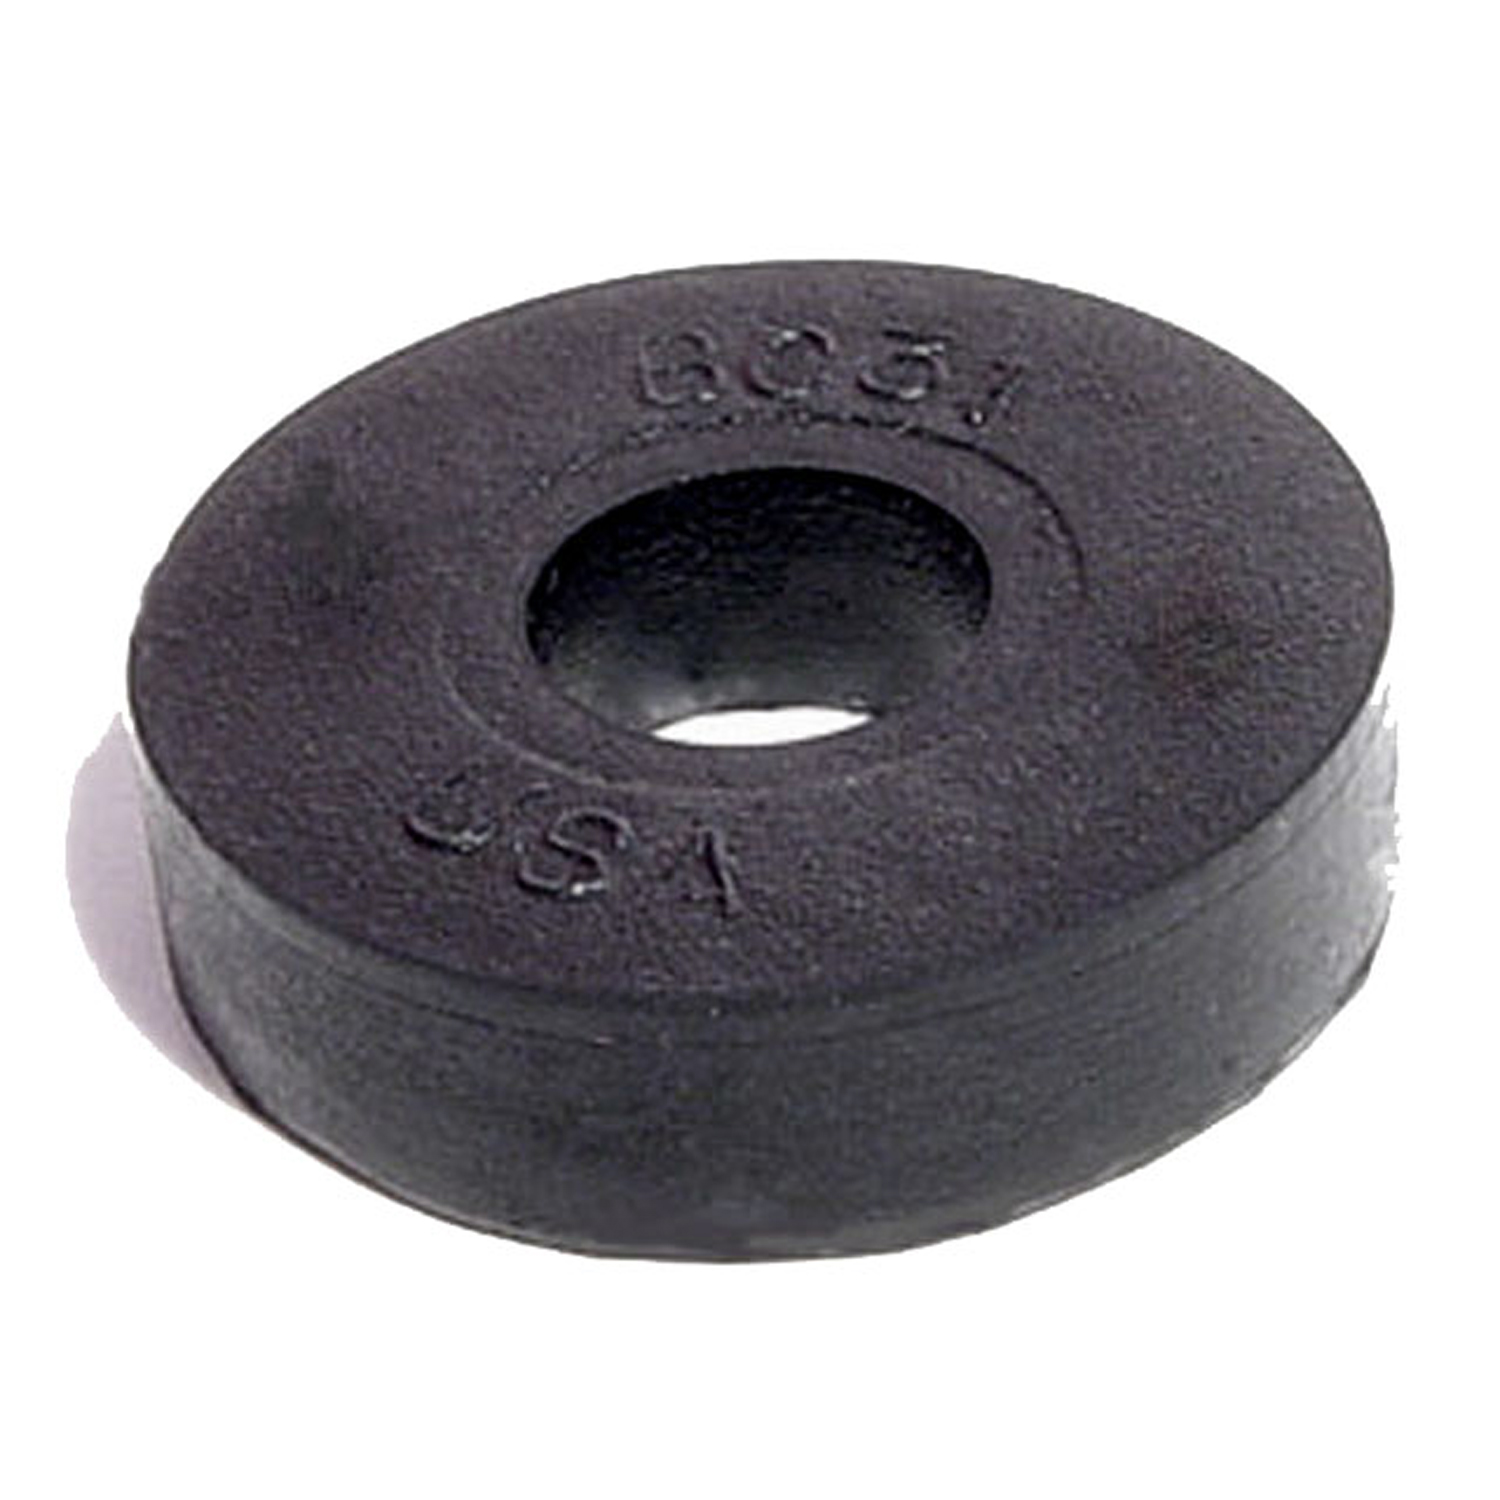 Cowl Vent Seal. Made of molded sponge